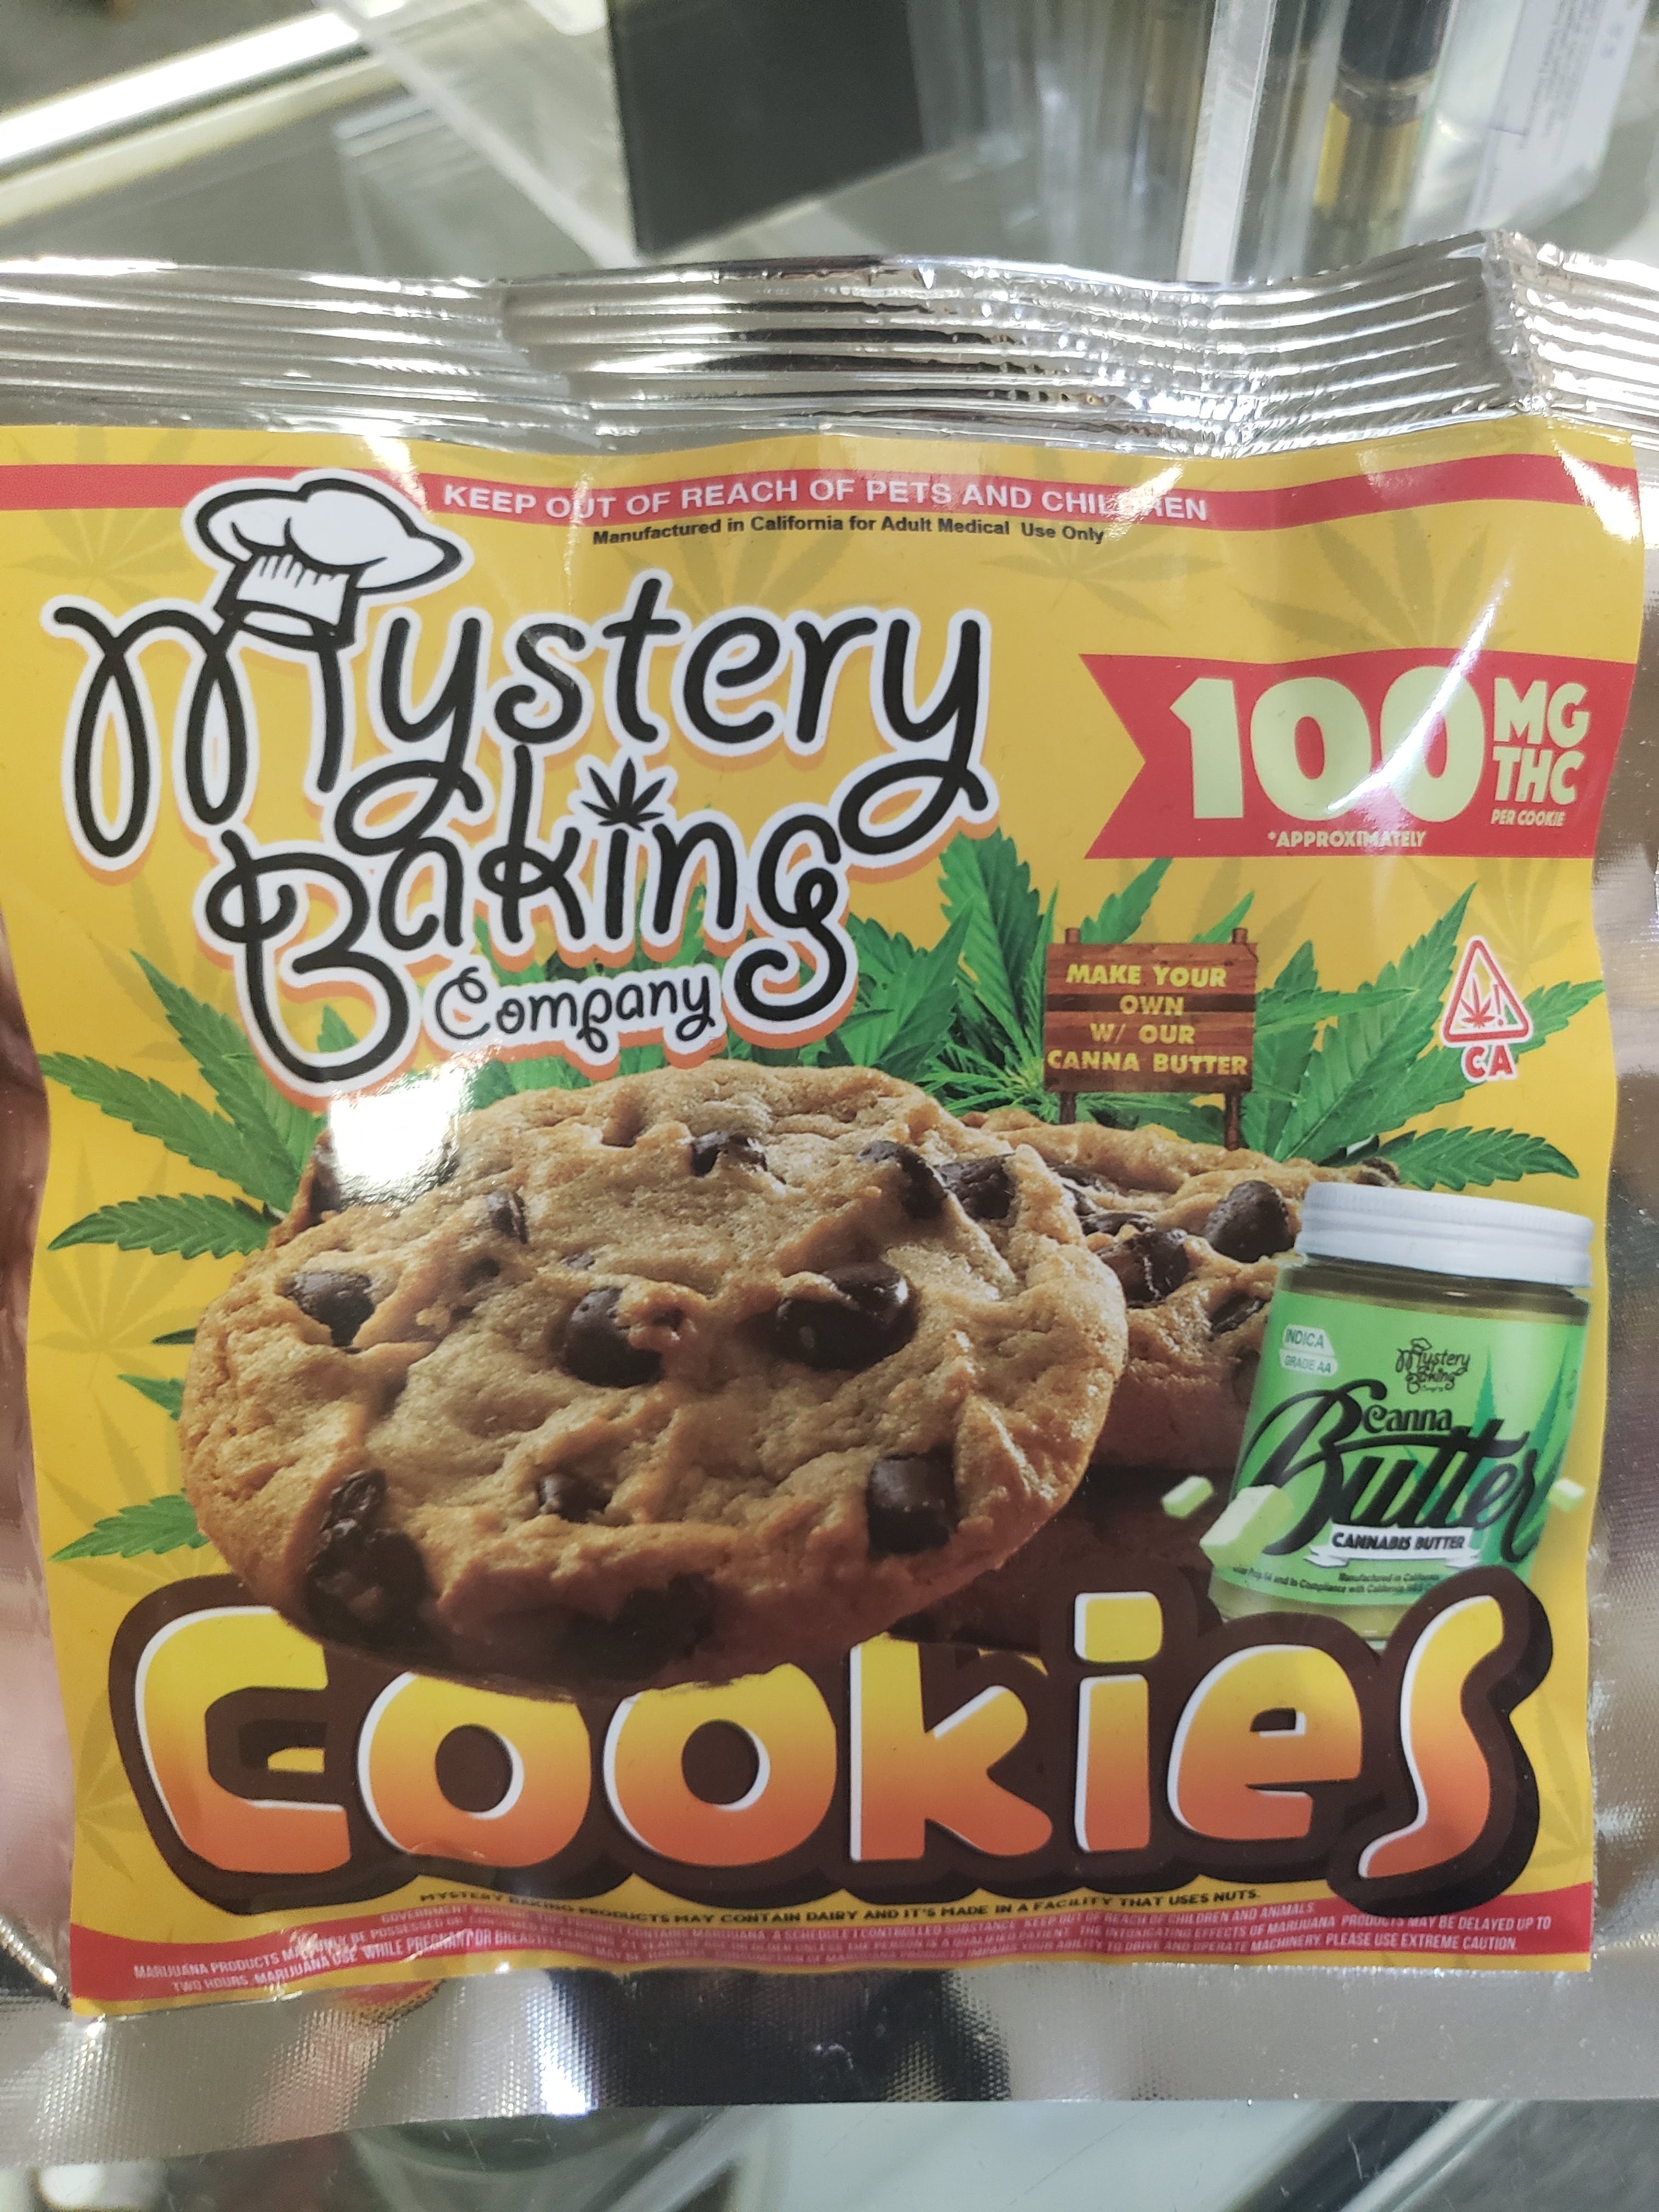 edible-mystery-baking-chocolate-chip-cookie